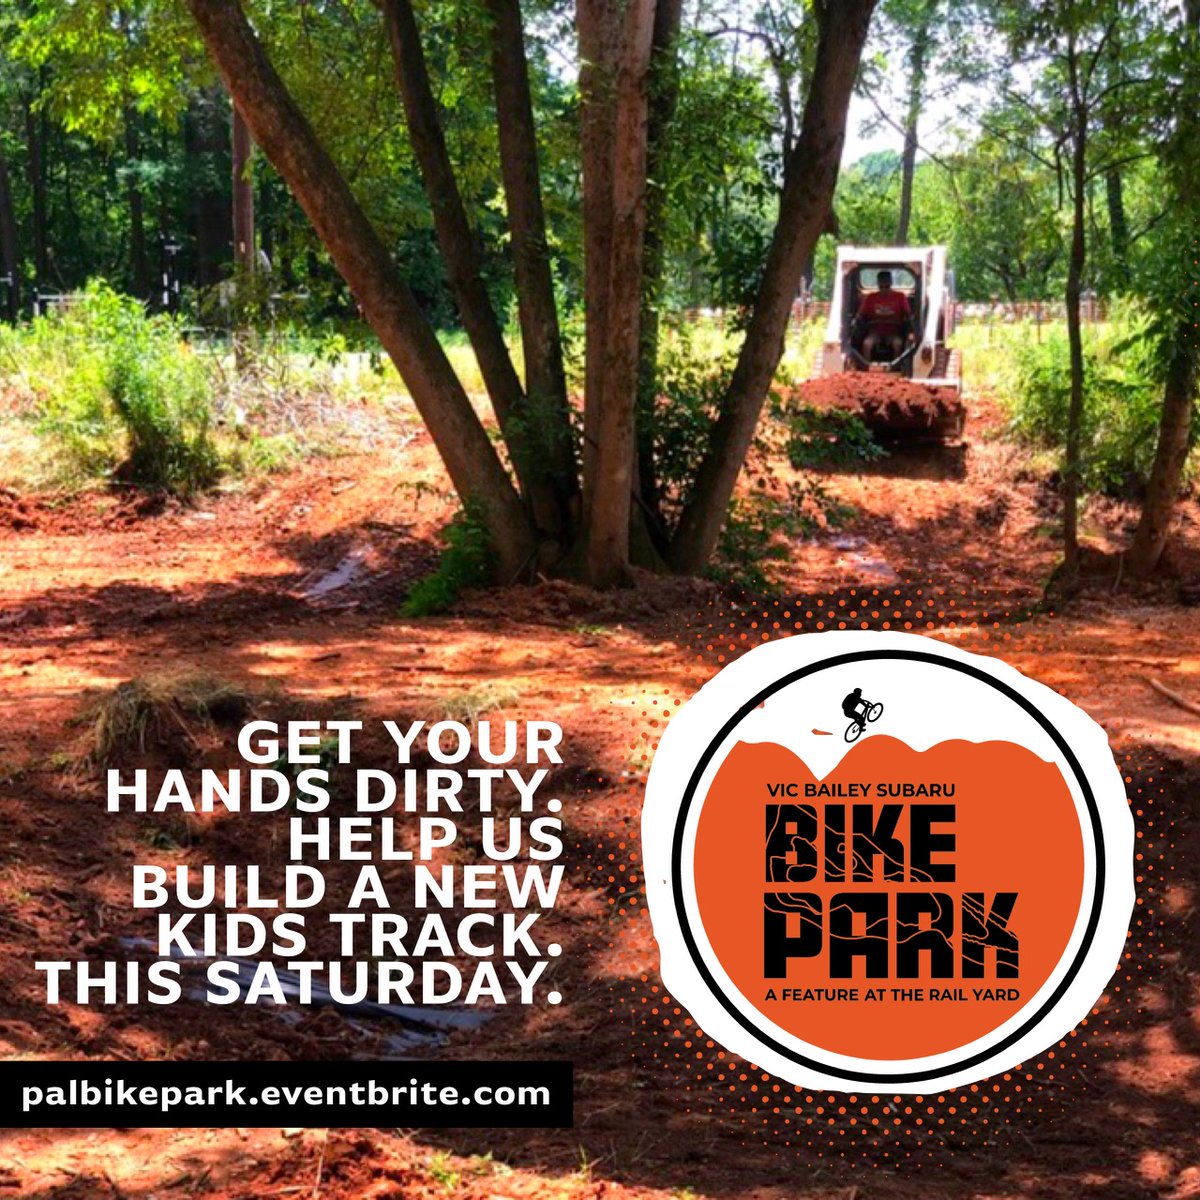 Our Bike Park Work Day is tomorrow morning at 10:30am and there is till time to register! Join us in improving our amenities for kids at the Vic Bailey Subaru Bike Park. Sign up at palbikepark.eventbrite.com. #PALBikePark #PALSpartanburg #BikeParkWorkDay